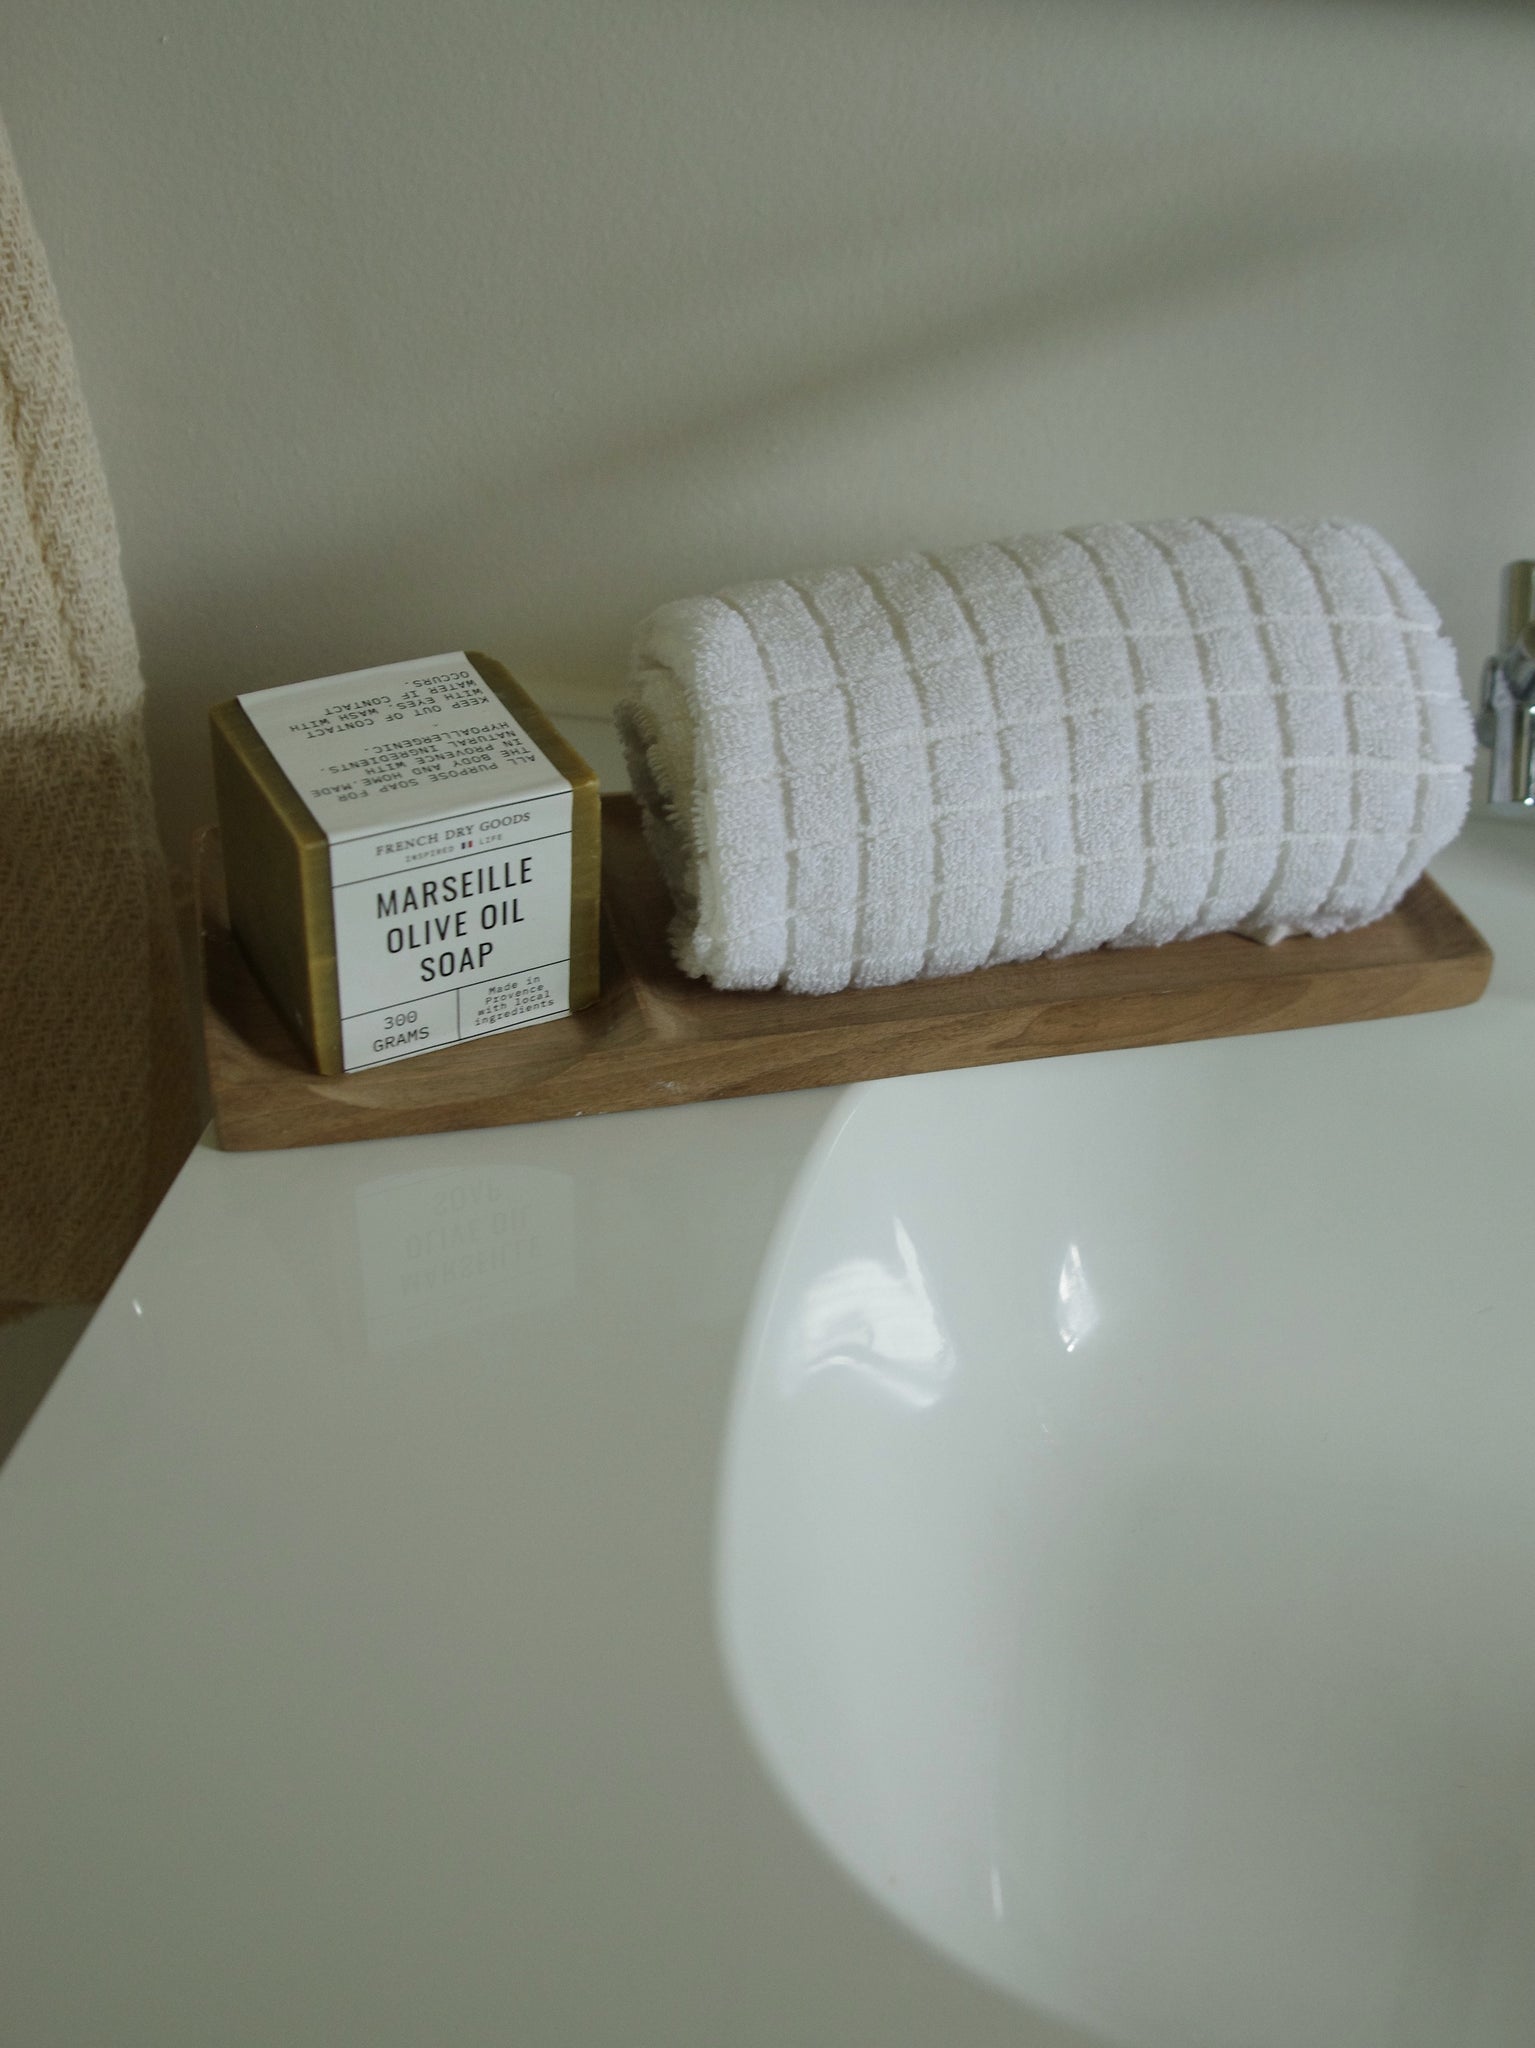 Wooden bathroom tray holding soap and folded towel.